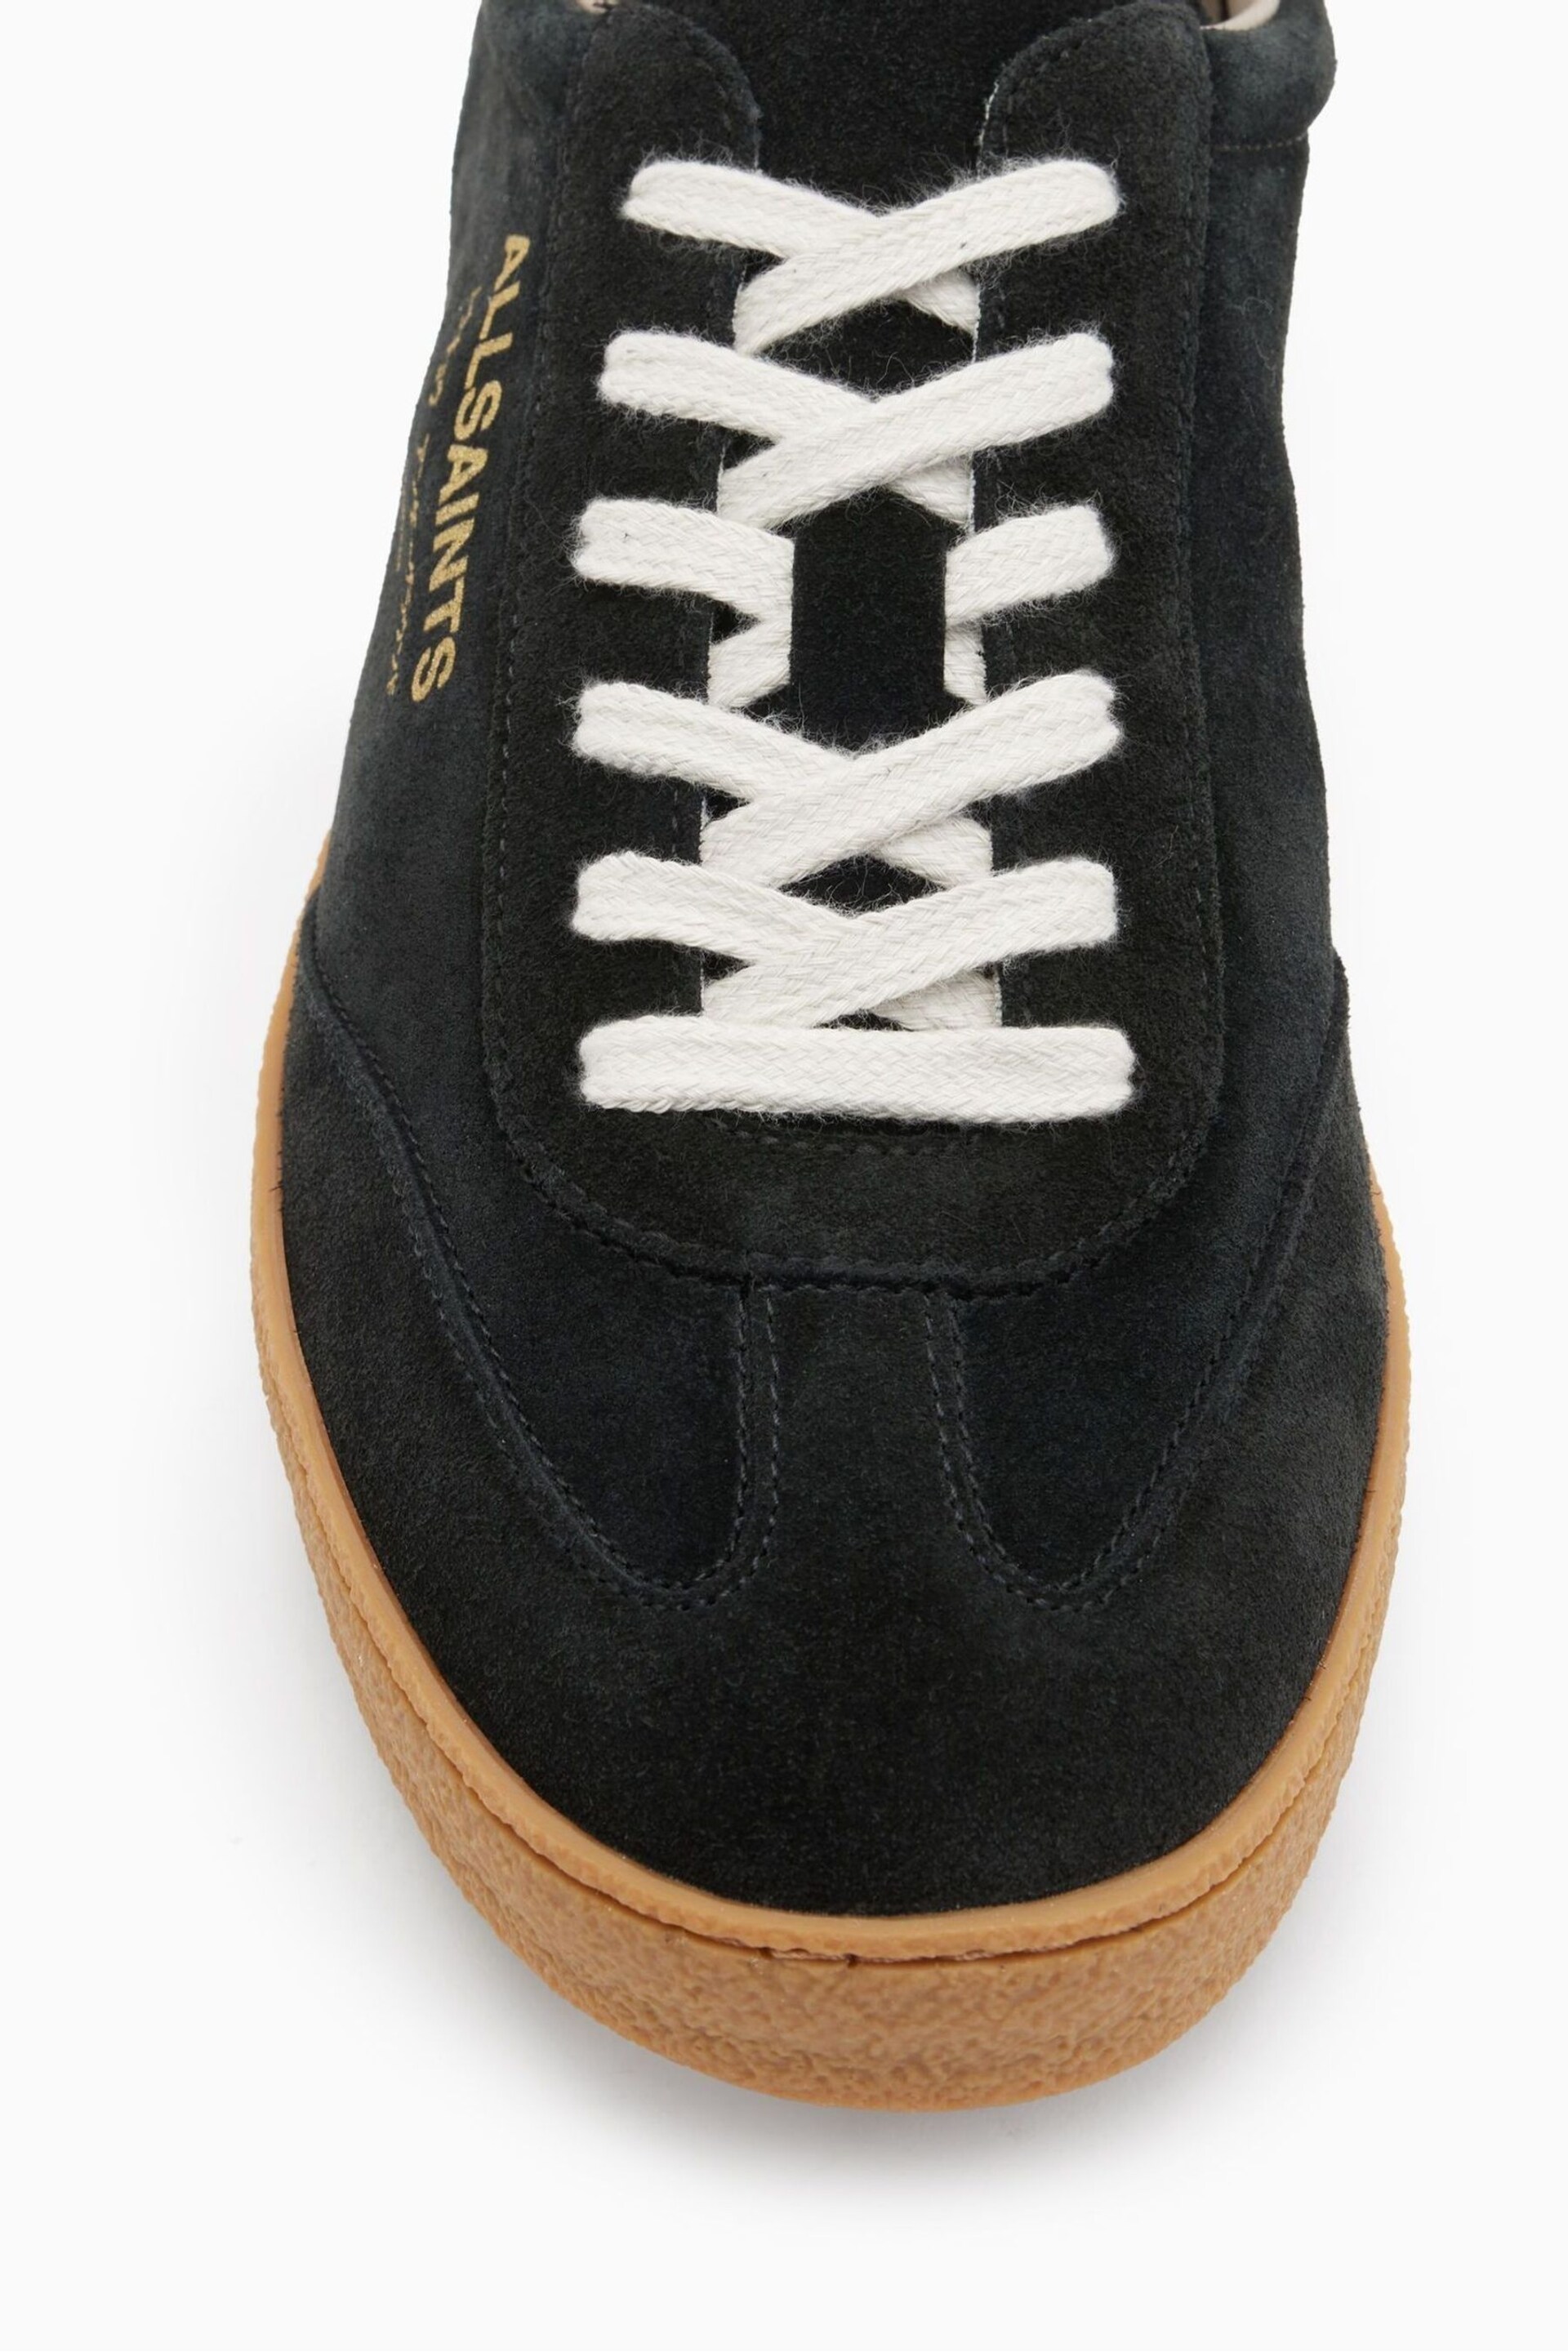 AllSaints Black Suede Thelma Sneakers - Image 4 of 5